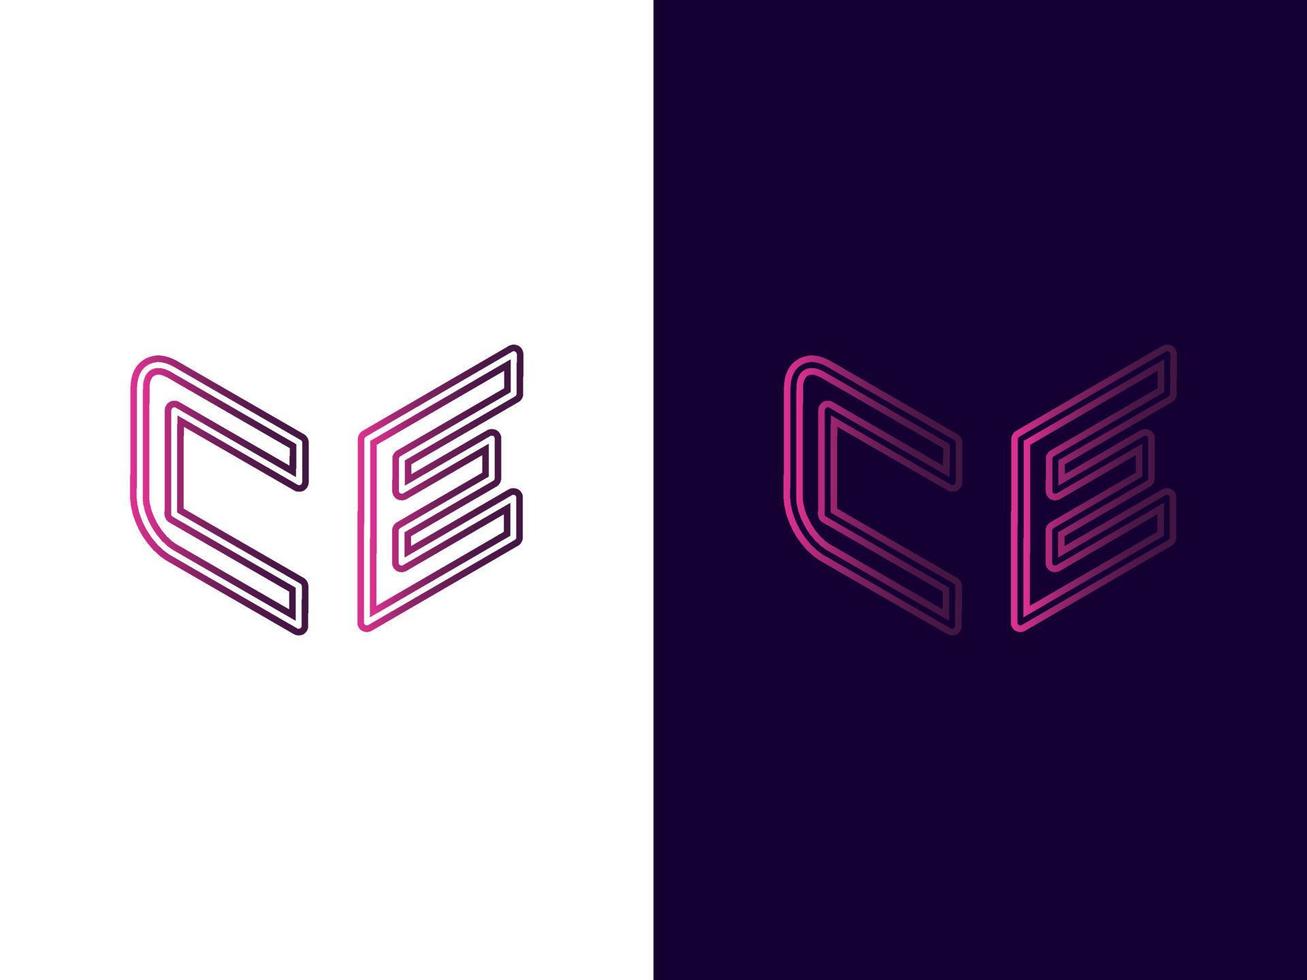 Initial letter CE minimalist and modern 3D logo design vector